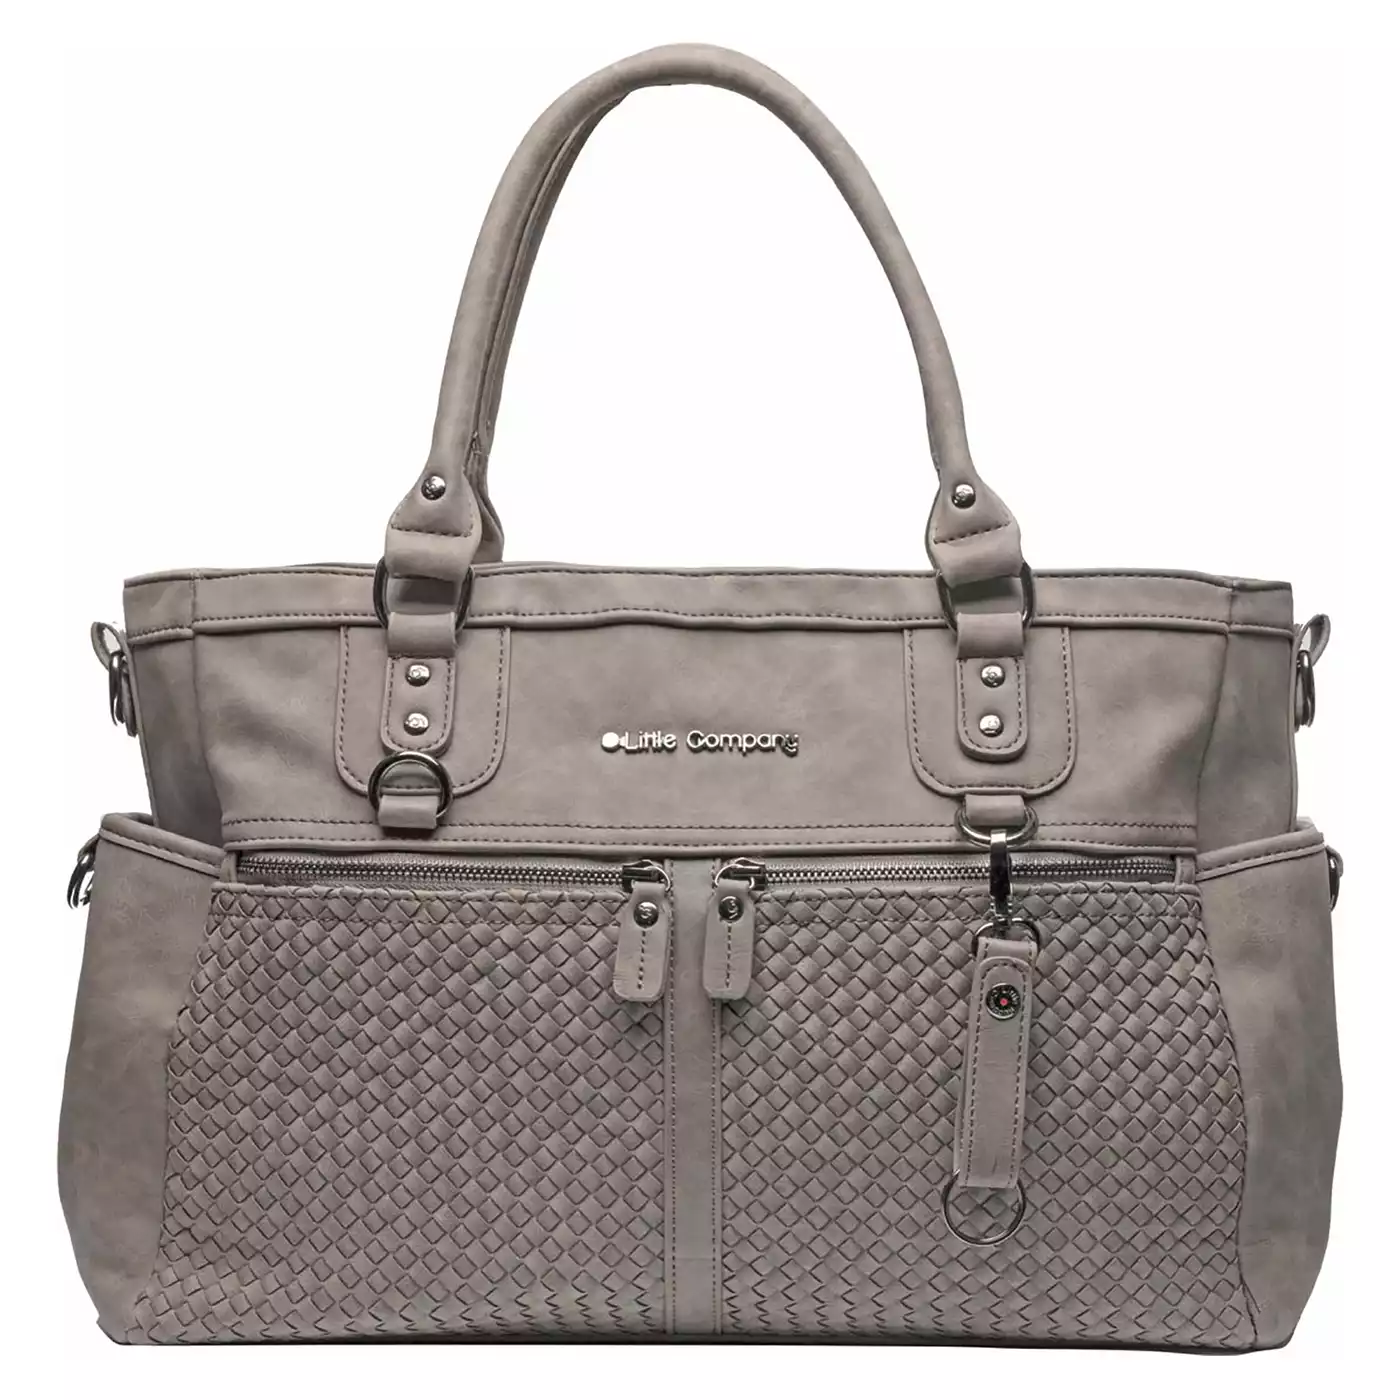 Wickeltasche Monaco Braided taupe Little Company Grau Taupe 2000576181262 3